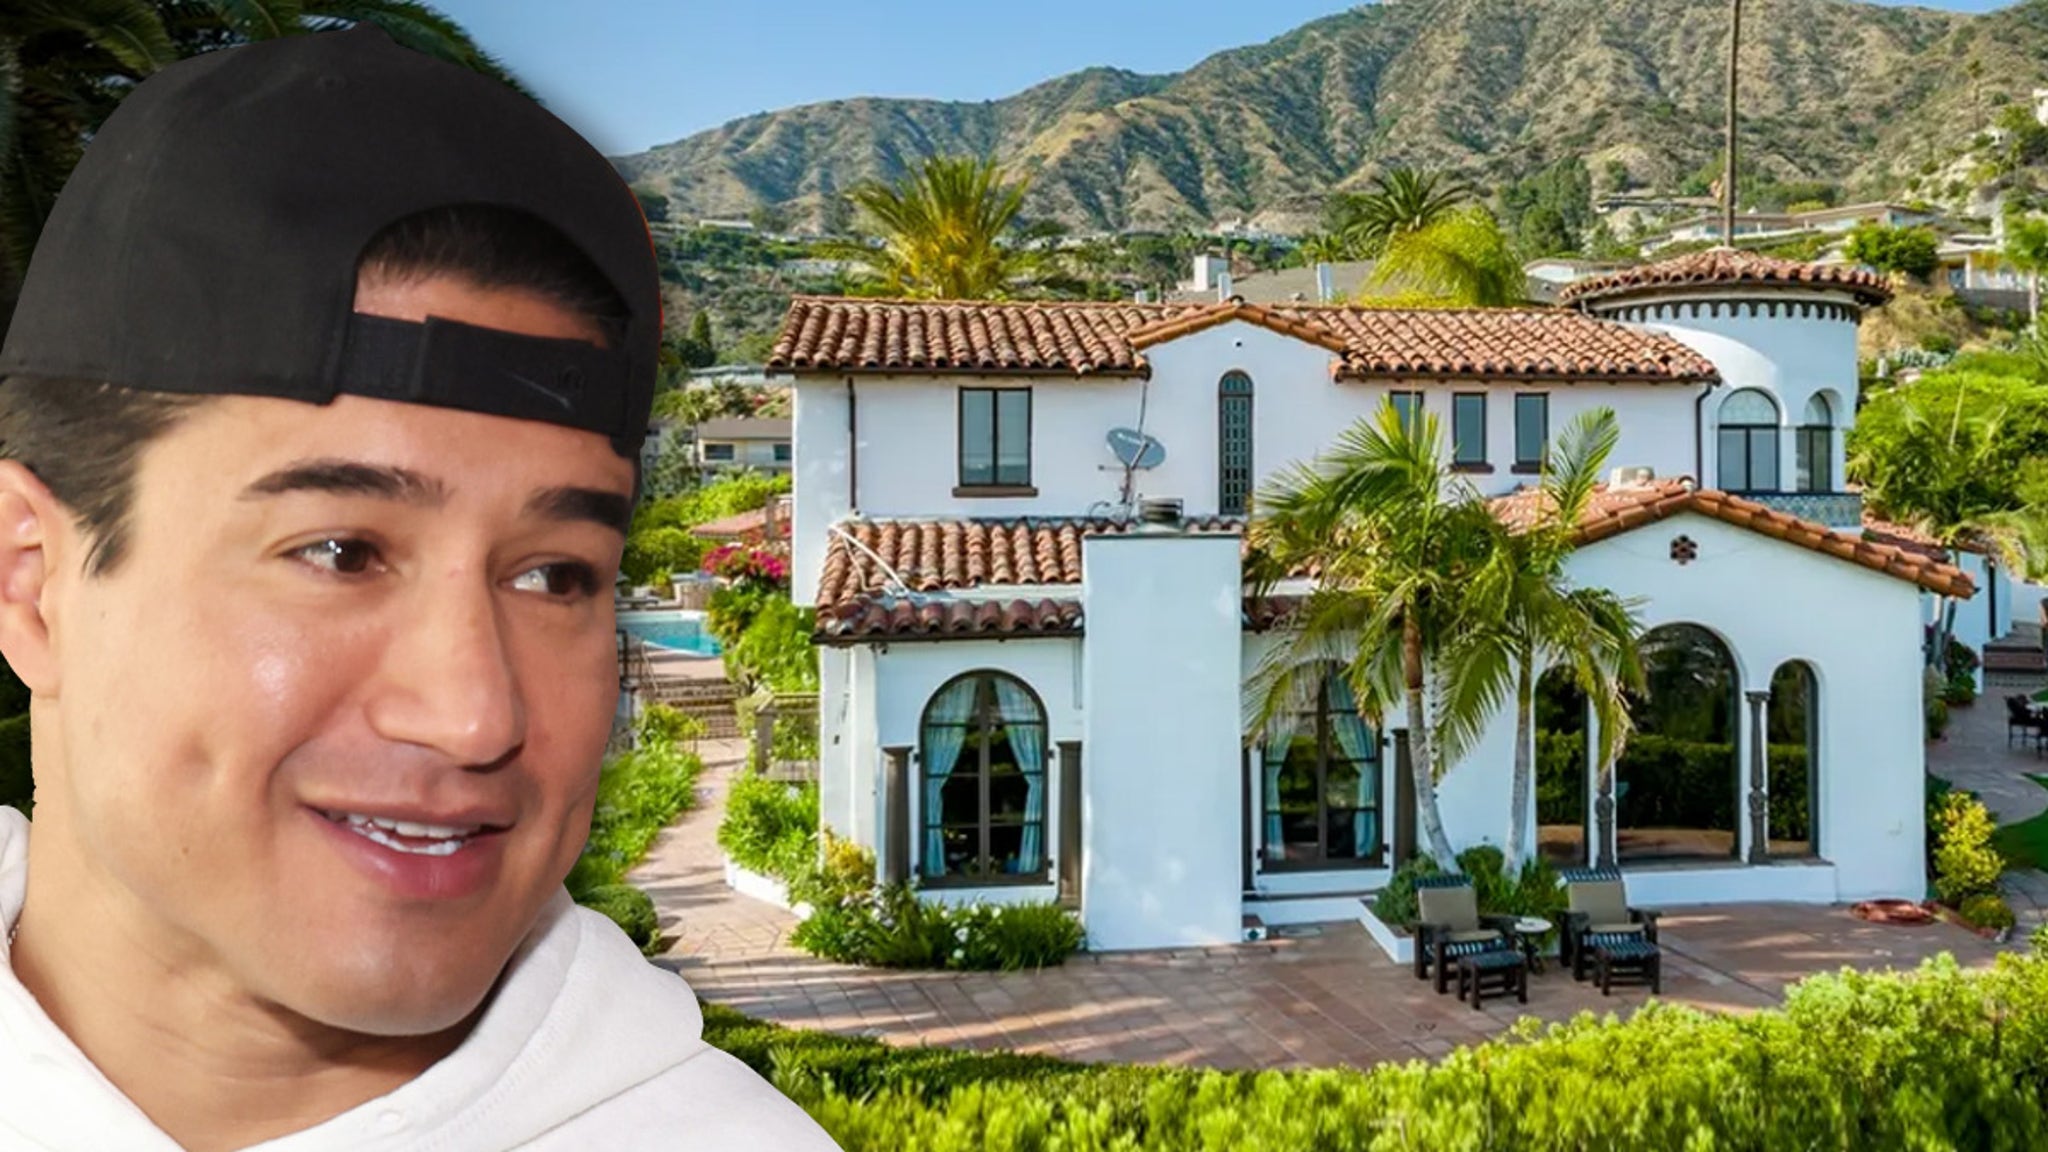 Mario Lopez's L.A. Home Sells for $4.5 Million #Mario